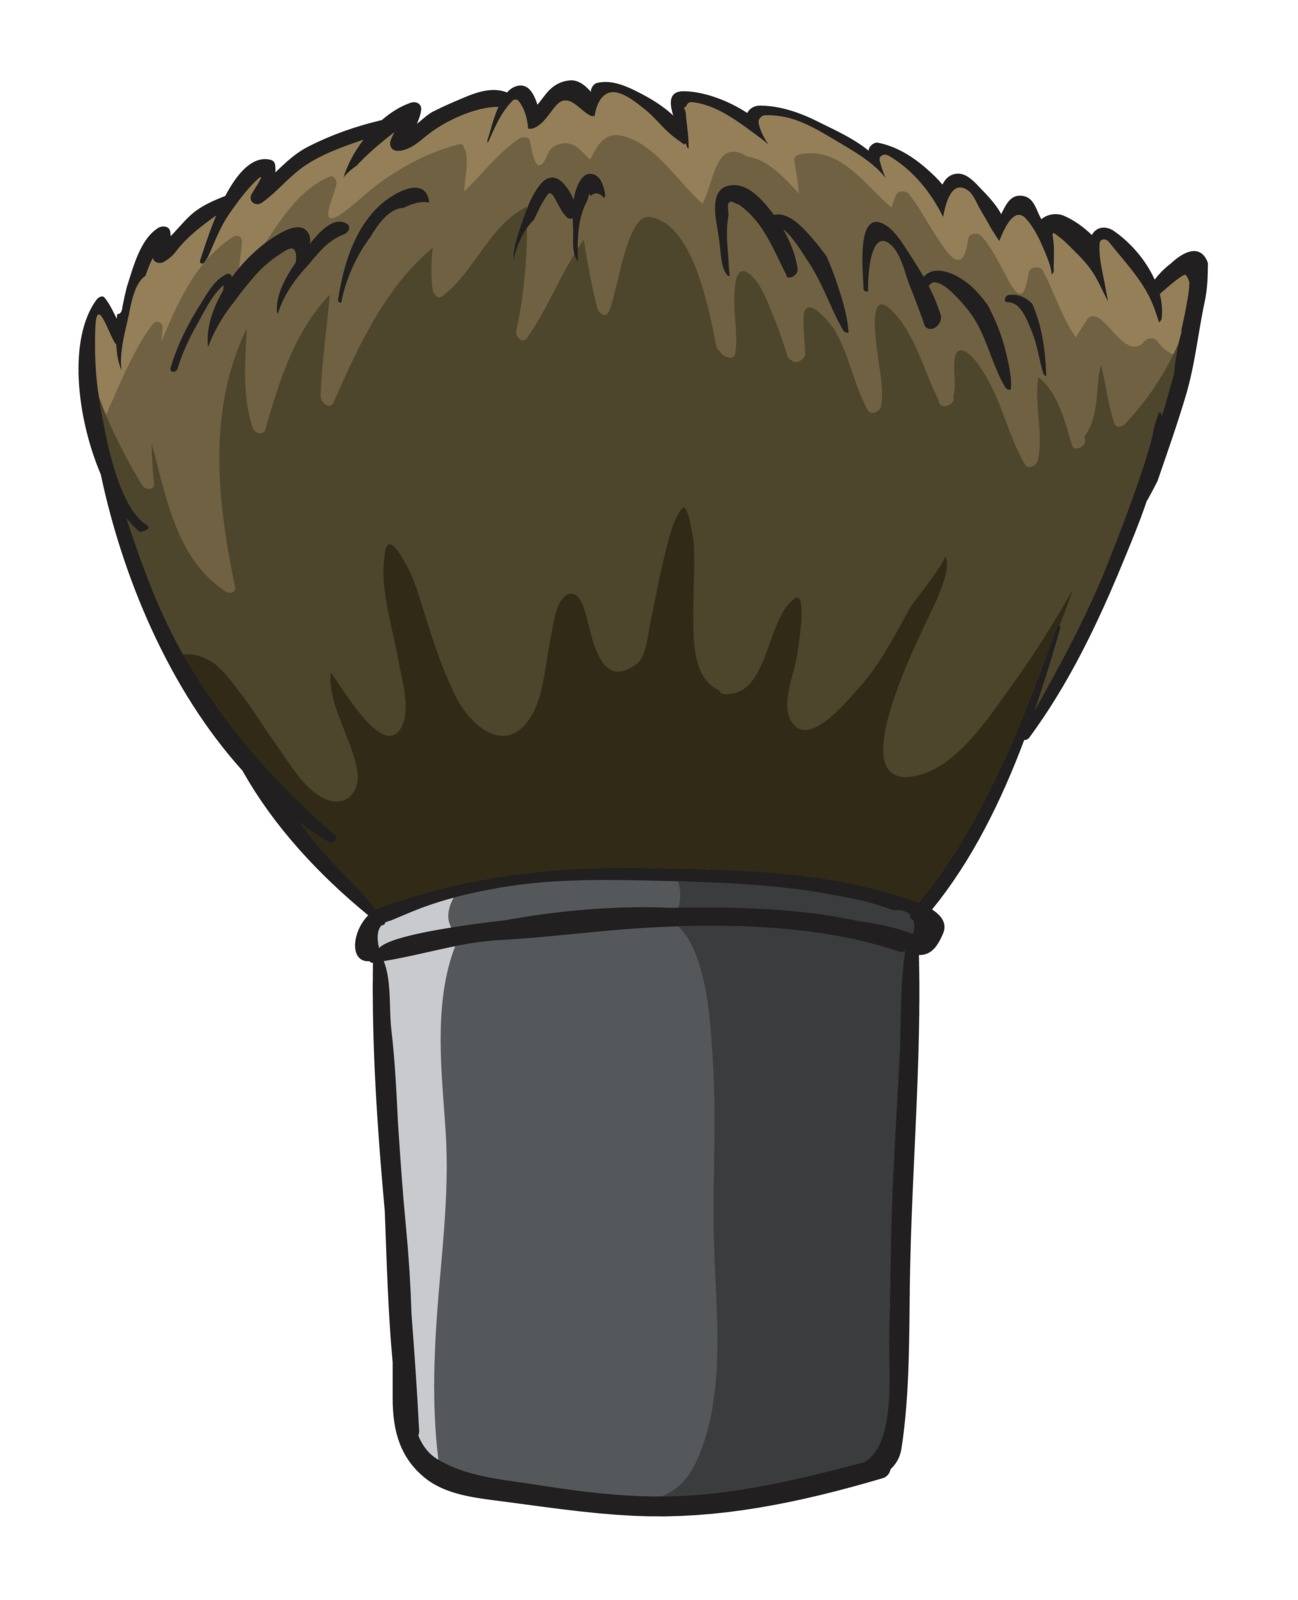 Illustration of a hard cleaning brush on a white background